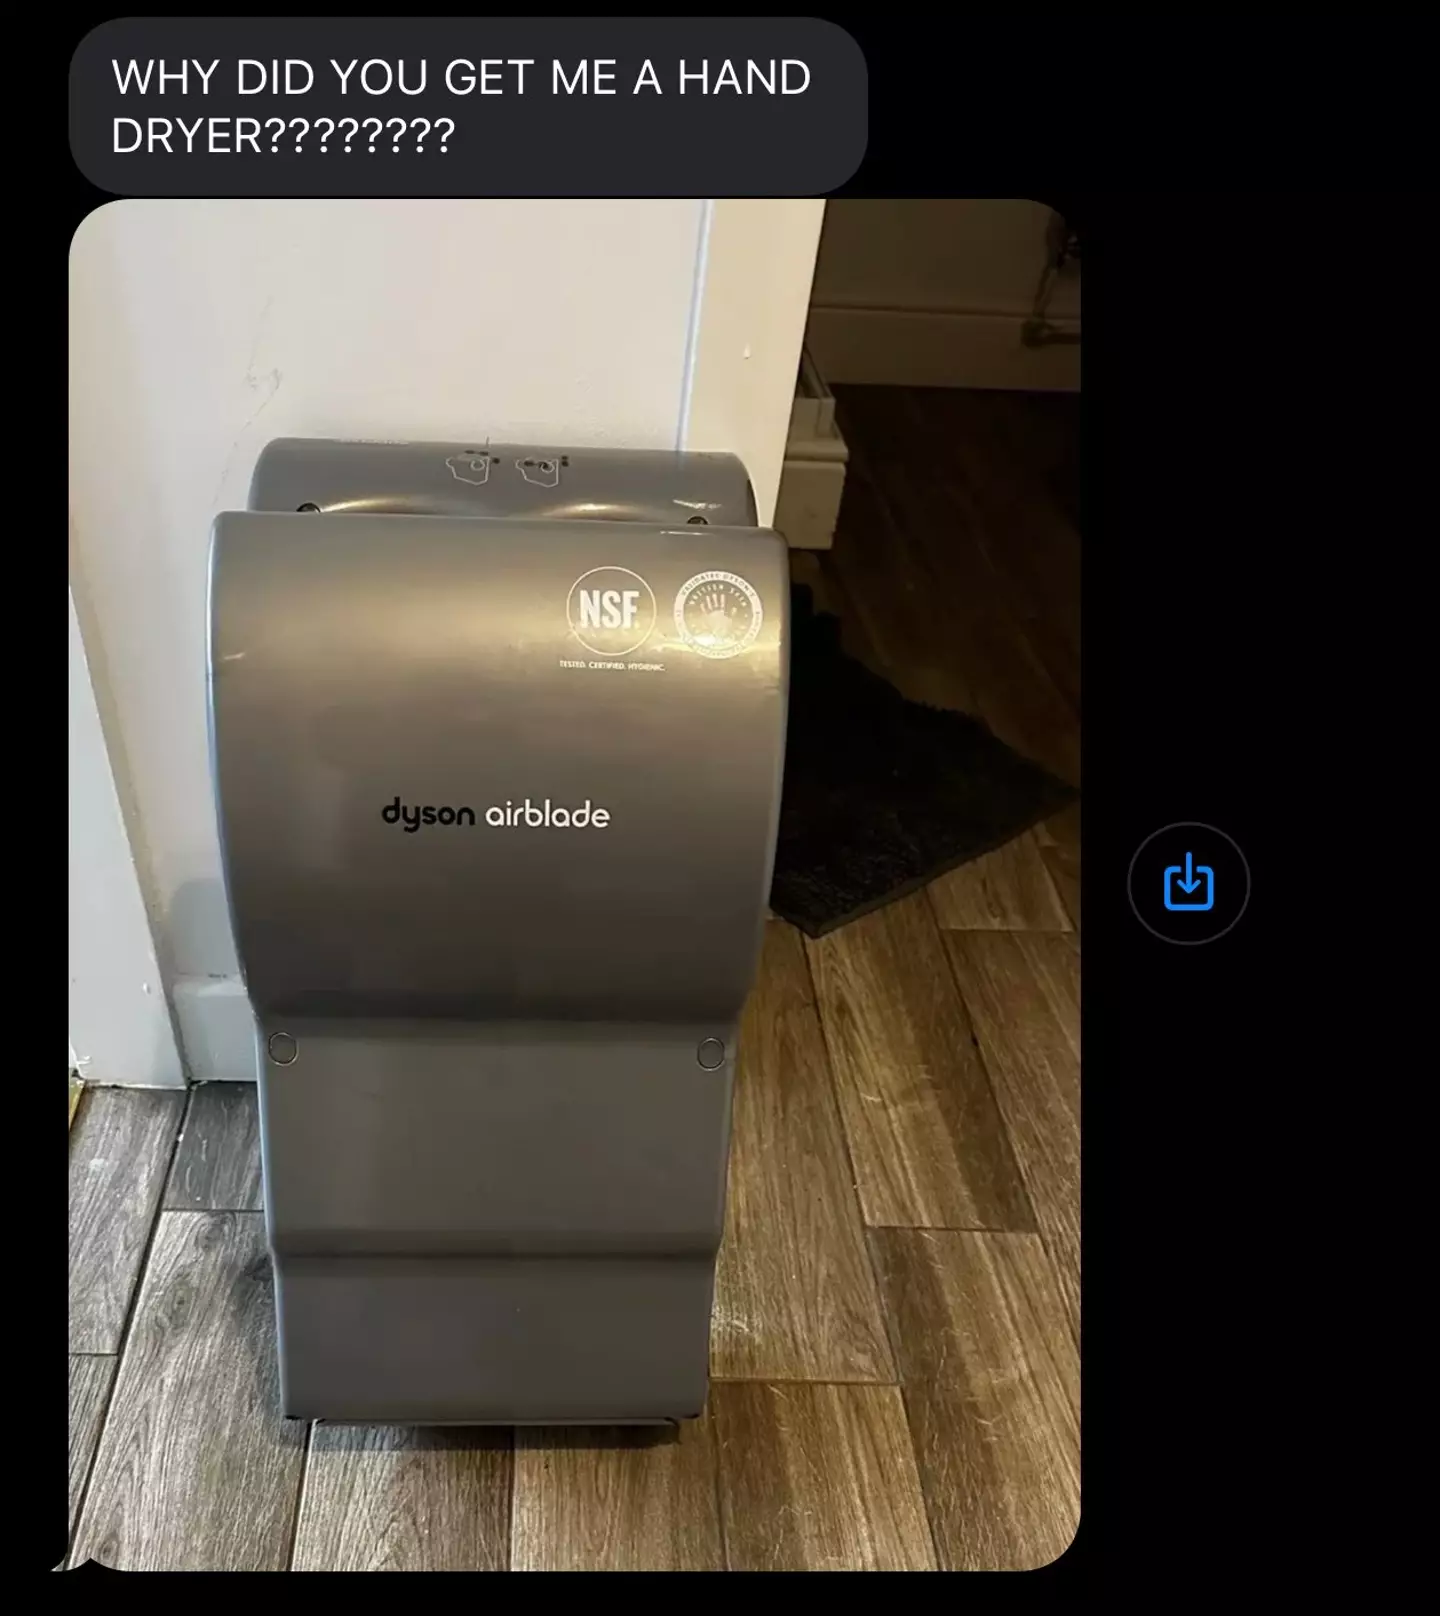 He claimed he got the Dyson Airwrap mixed up with the Dyson Airblade.